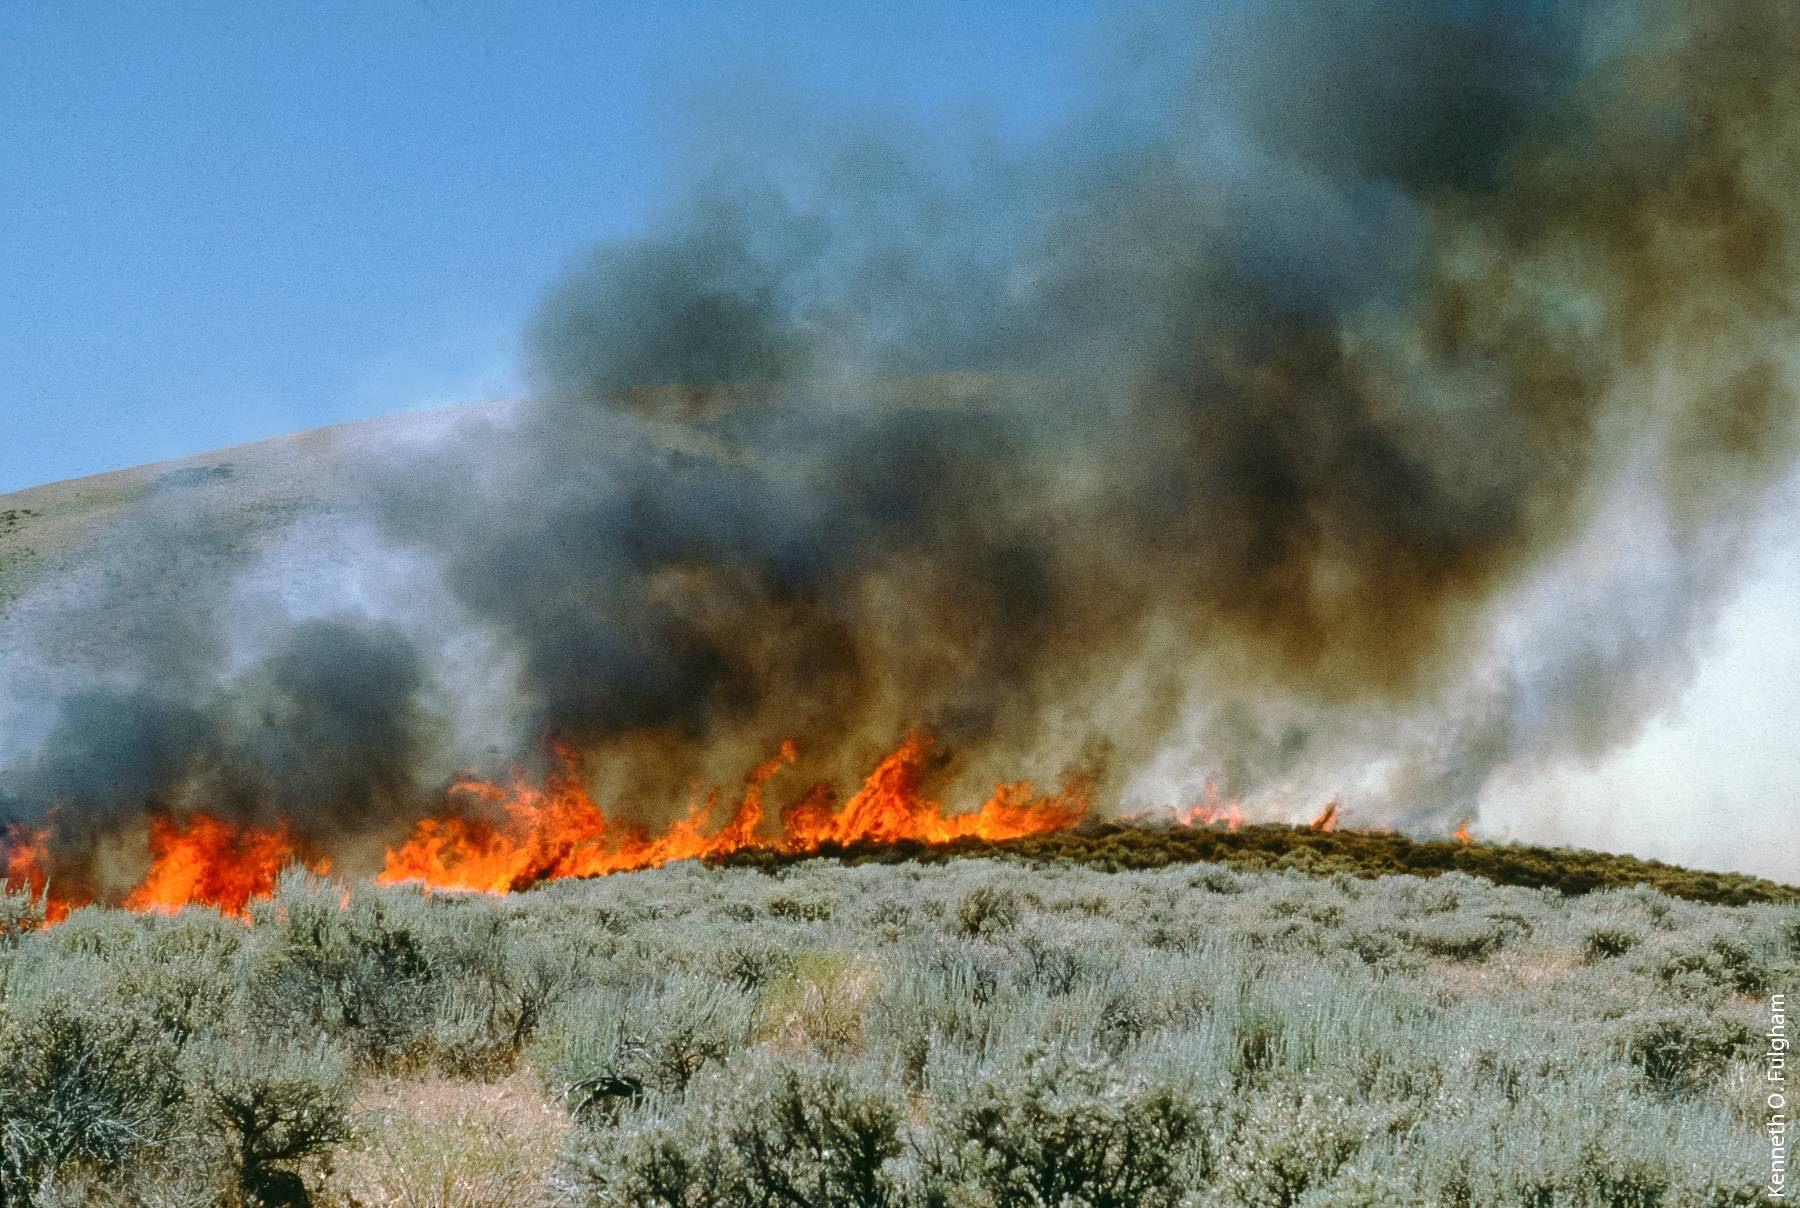 Fire is one of the most common tools to restore sagebrush ecosystems. In the absence of fire, sagebrush stands become dense and conifers increase, reducing the perennial grass and forb components that are an important part of the sagebrush ecosystem. Above, prescribed fire at the Lacy site, summer 1981.